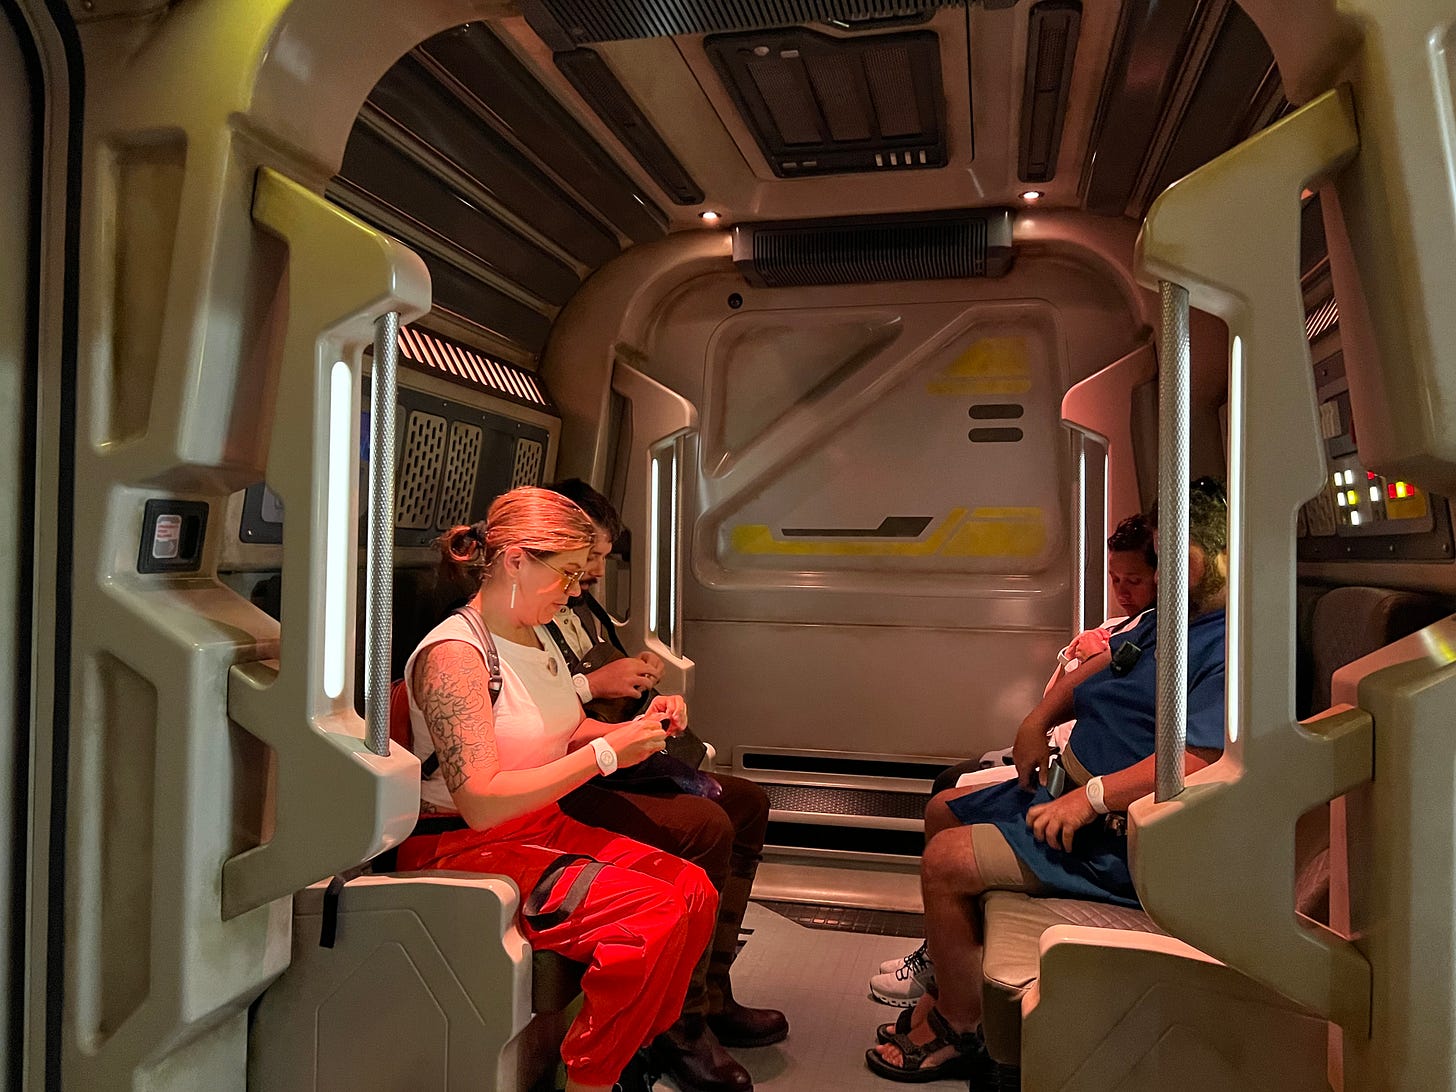 Four people sitting in a fictional small transport shuttle